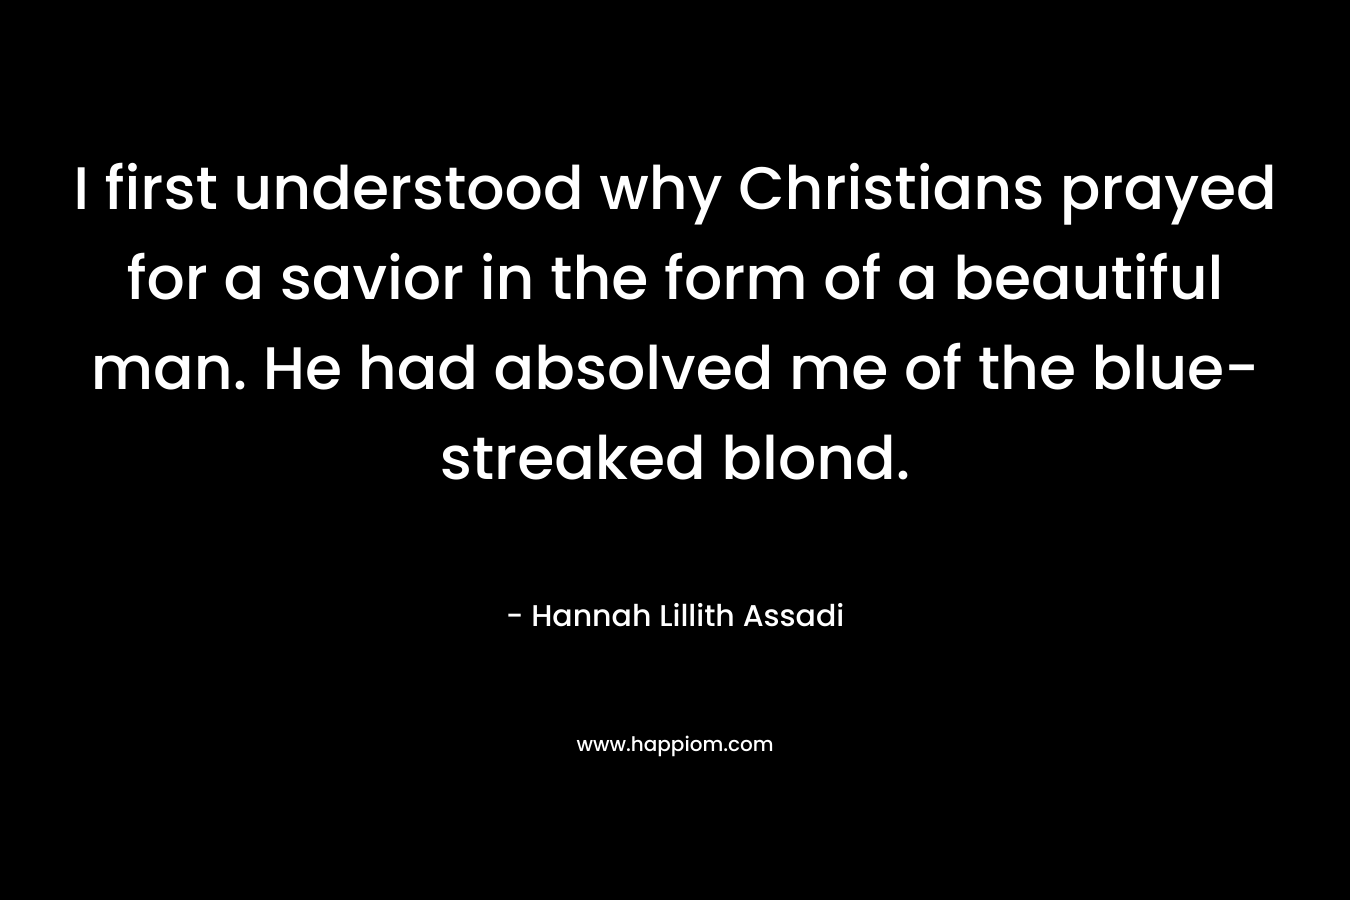 I first understood why Christians prayed for a savior in the form of a beautiful man. He had absolved me of the blue-streaked blond.